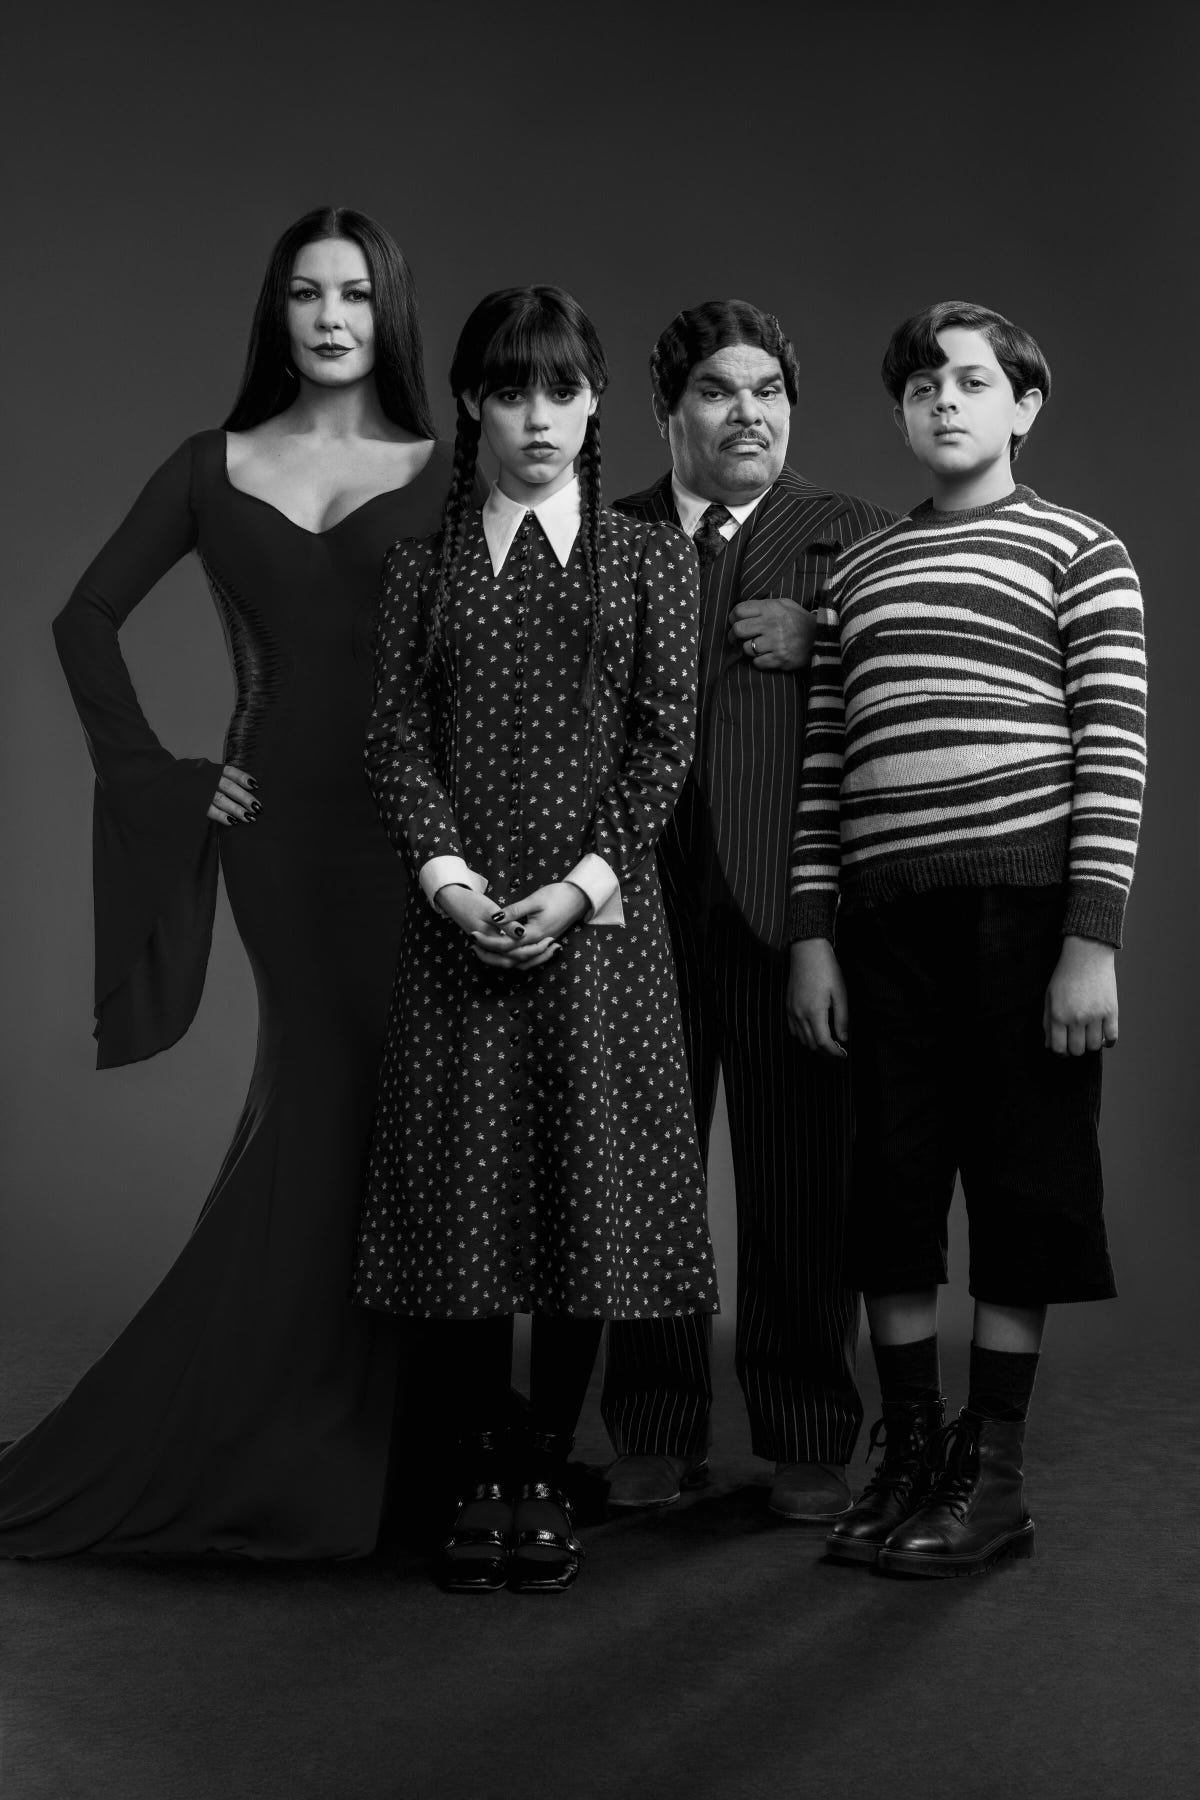 Black and white image of the comically gothic Addams Family.